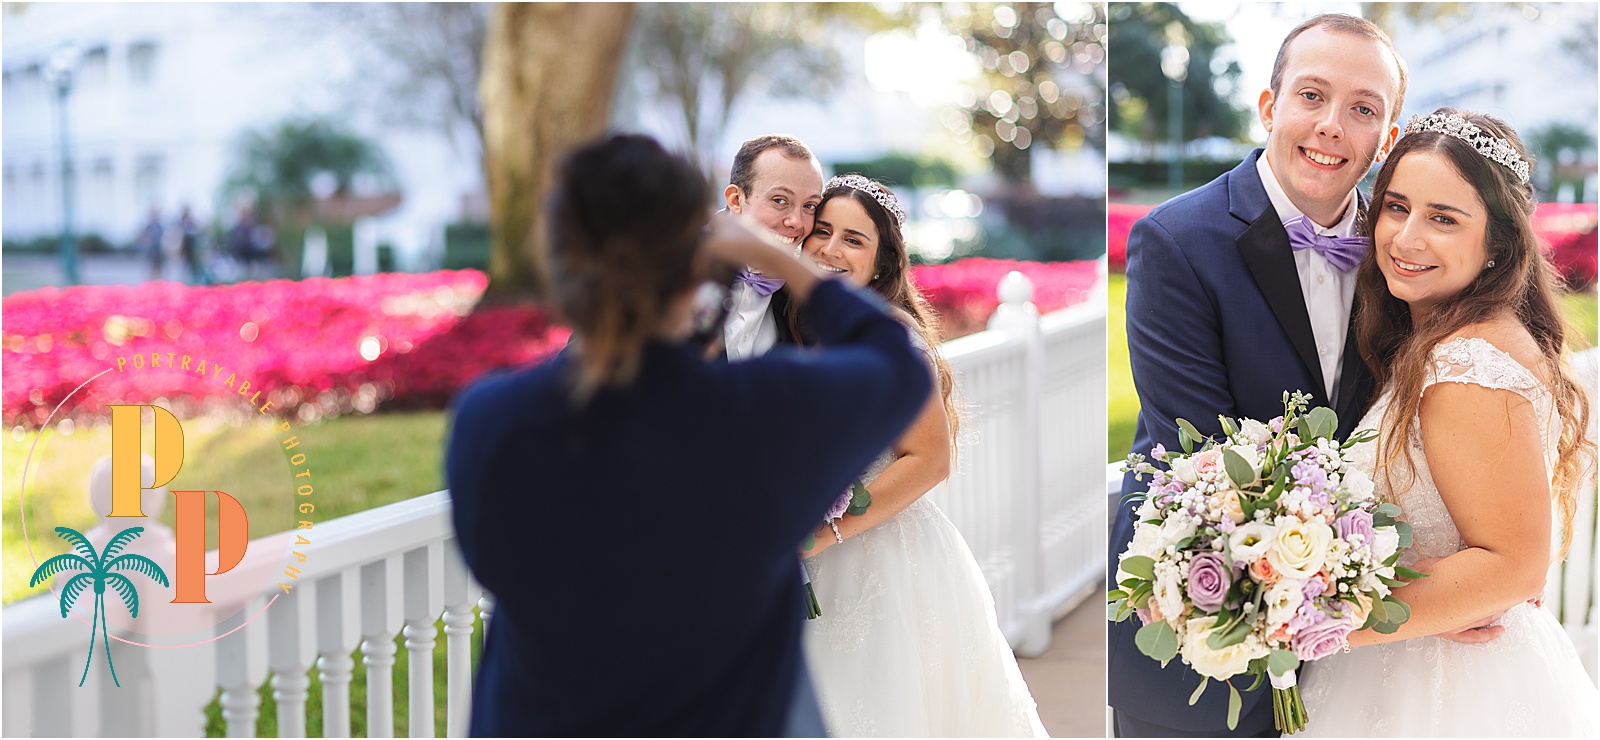 Hiring an outside photographer for your Disney wedding ensures candid moments, like the couple stealing a quiet, magical kiss amidst the beauty of the theme park.